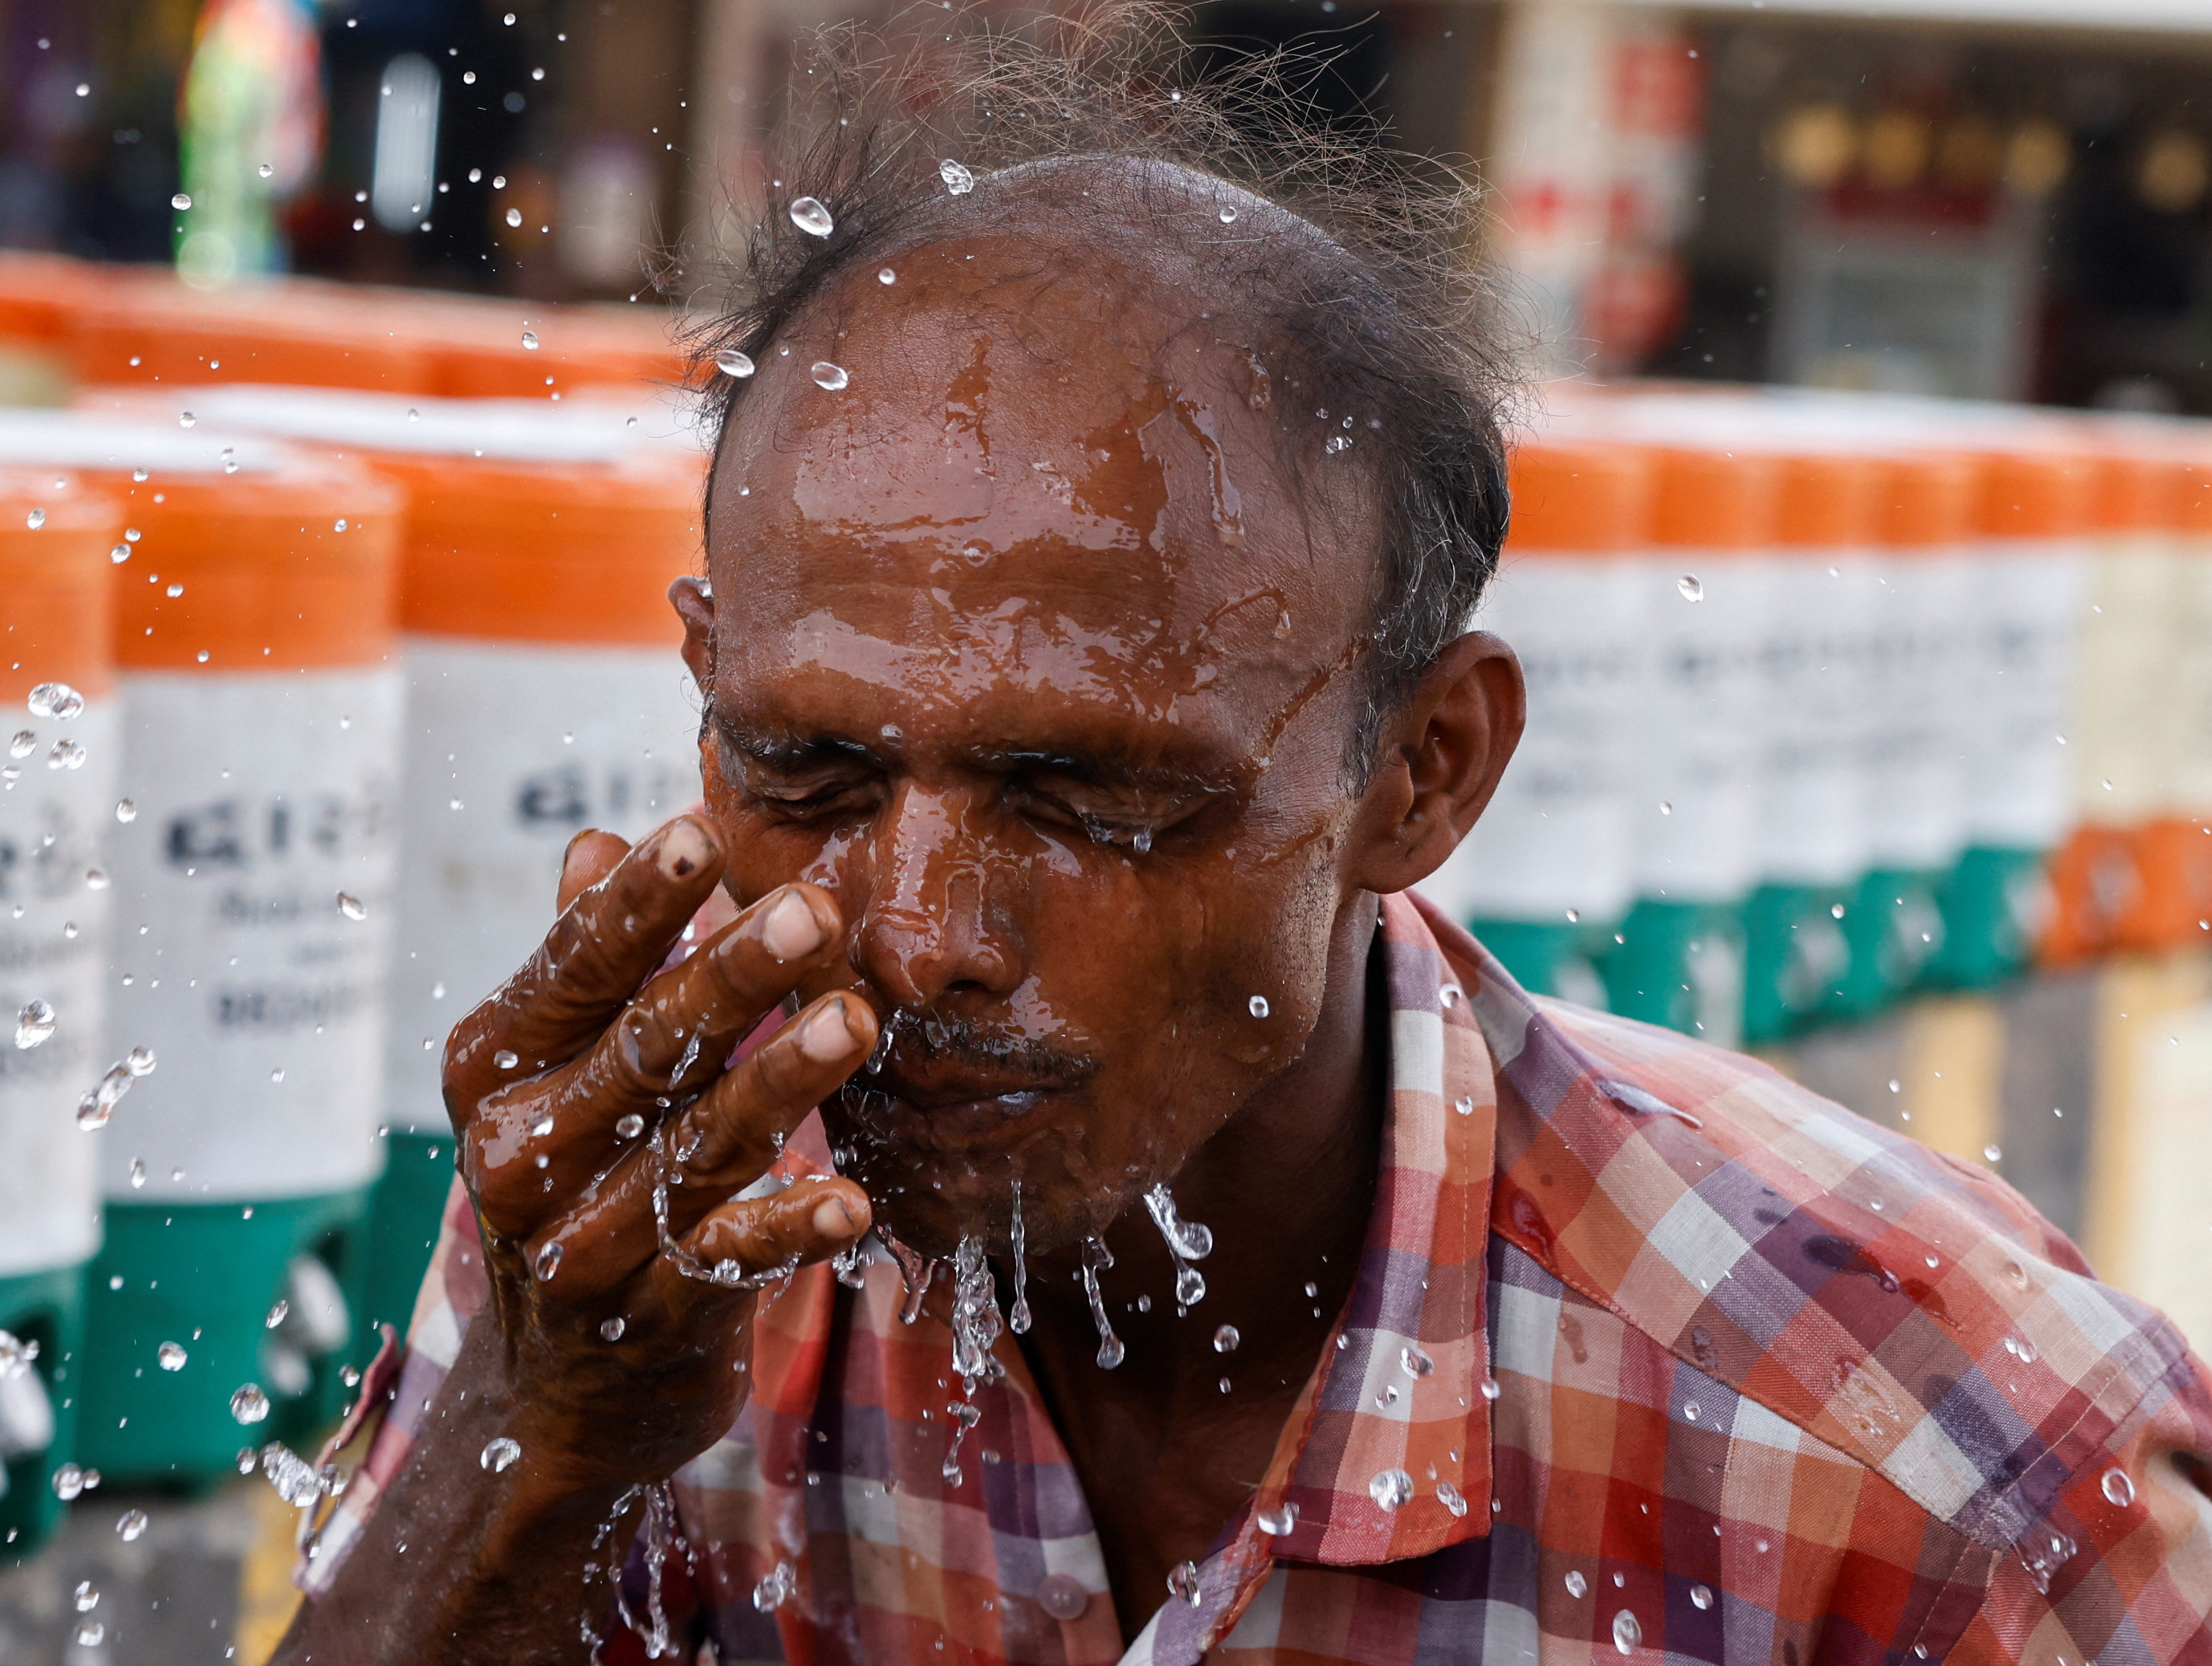 A man sprays cold water on his face from a water jar during a heatwave in Ahmedabad